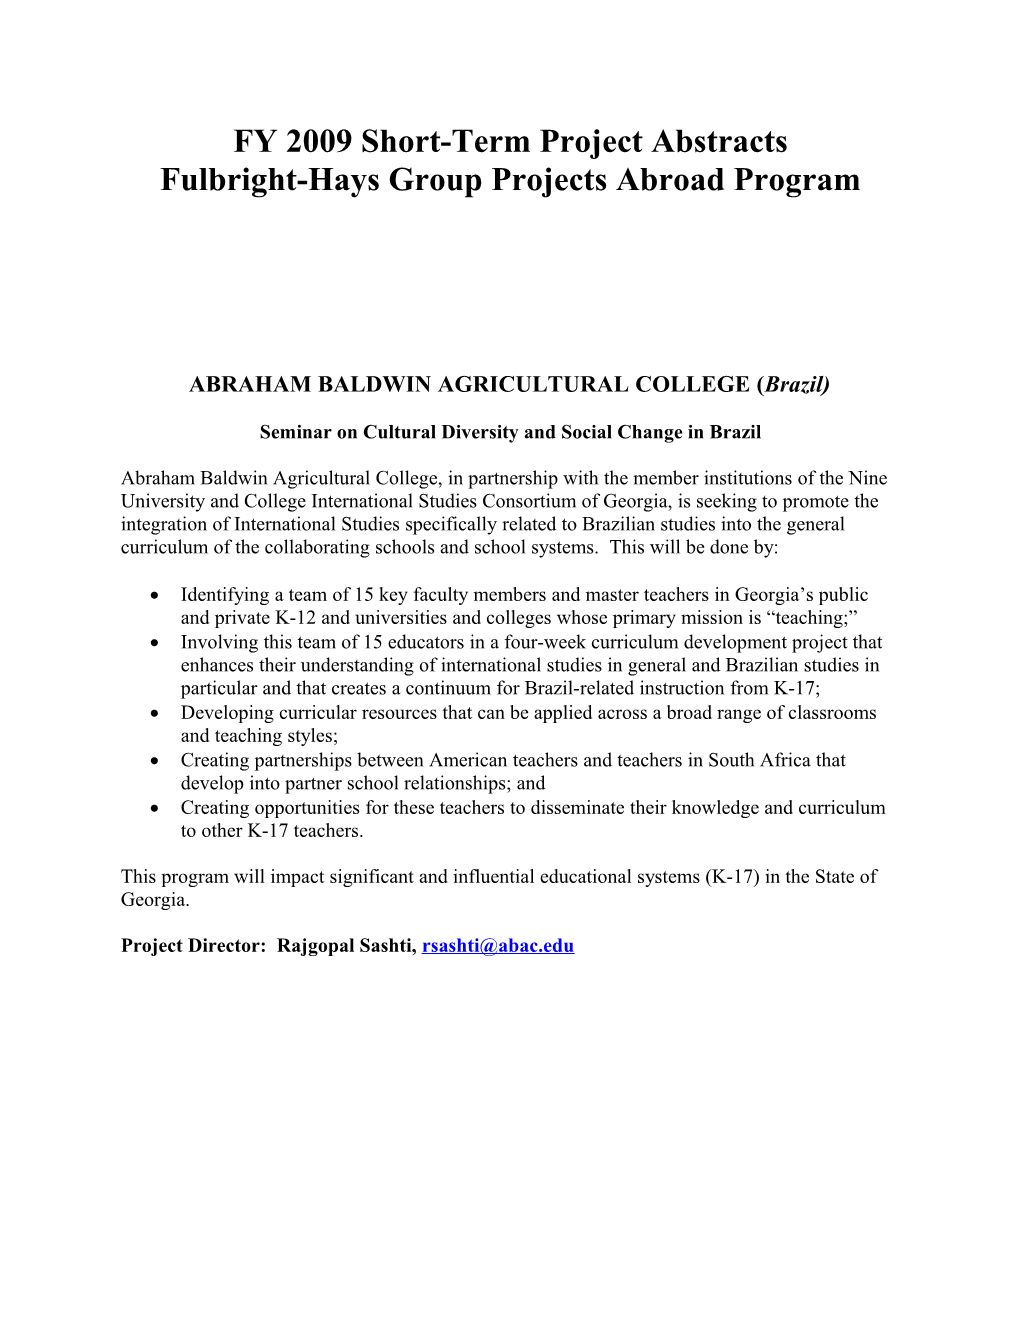 FY 2009 Project Abstracts Under the Fulbright-Hays Group Projects Abroad Program (MS Word)